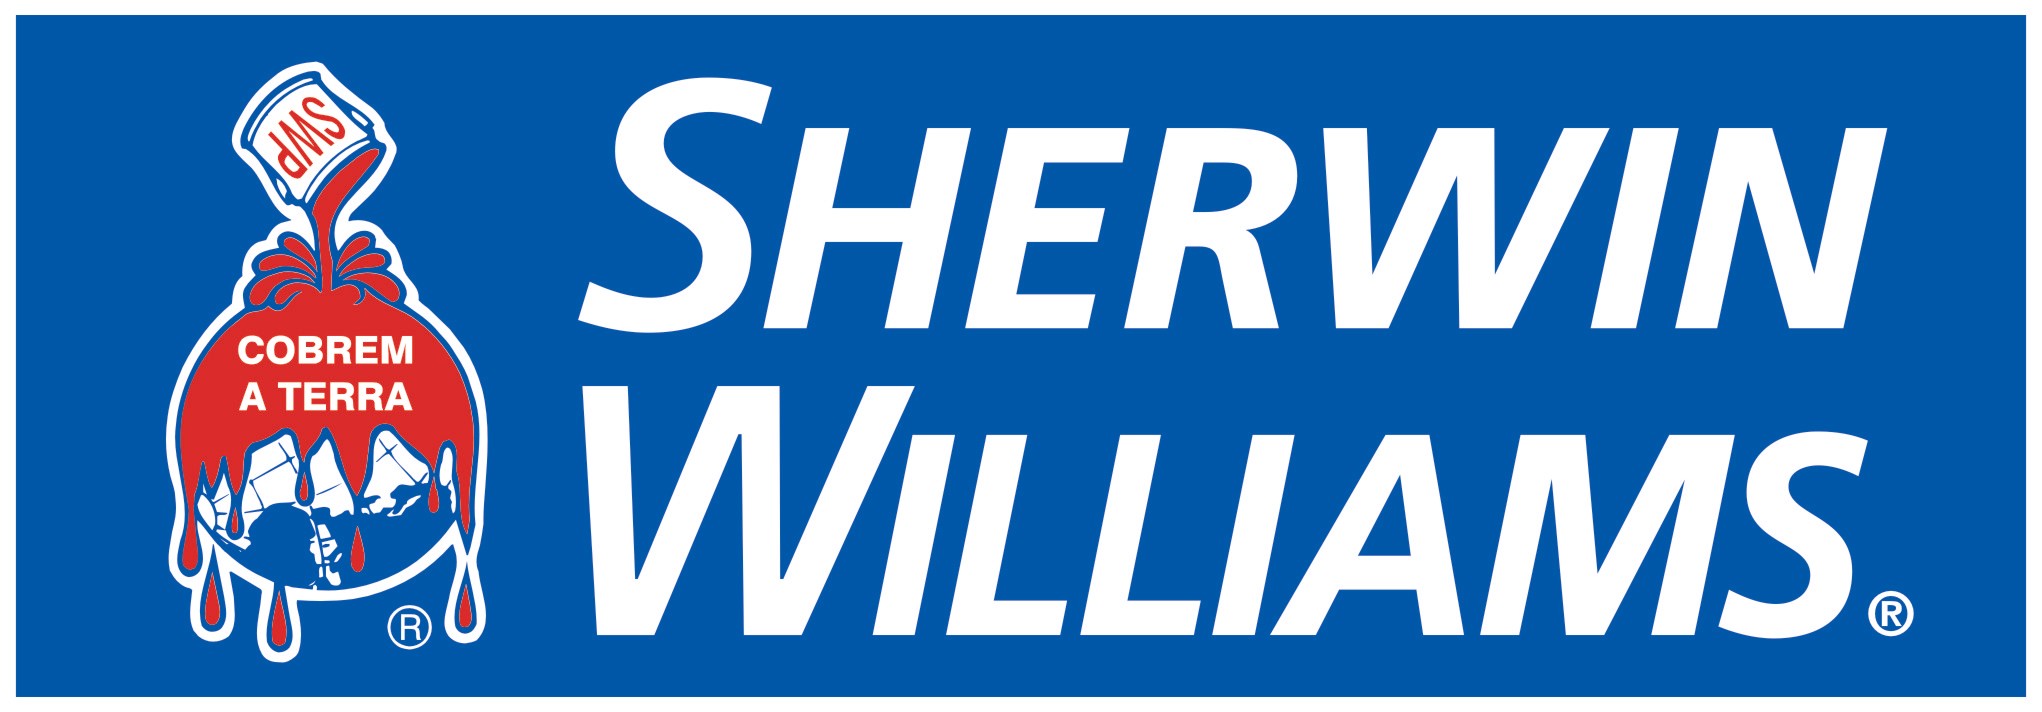 40-off-sherwin-williams-paint-coupon-10-off-50